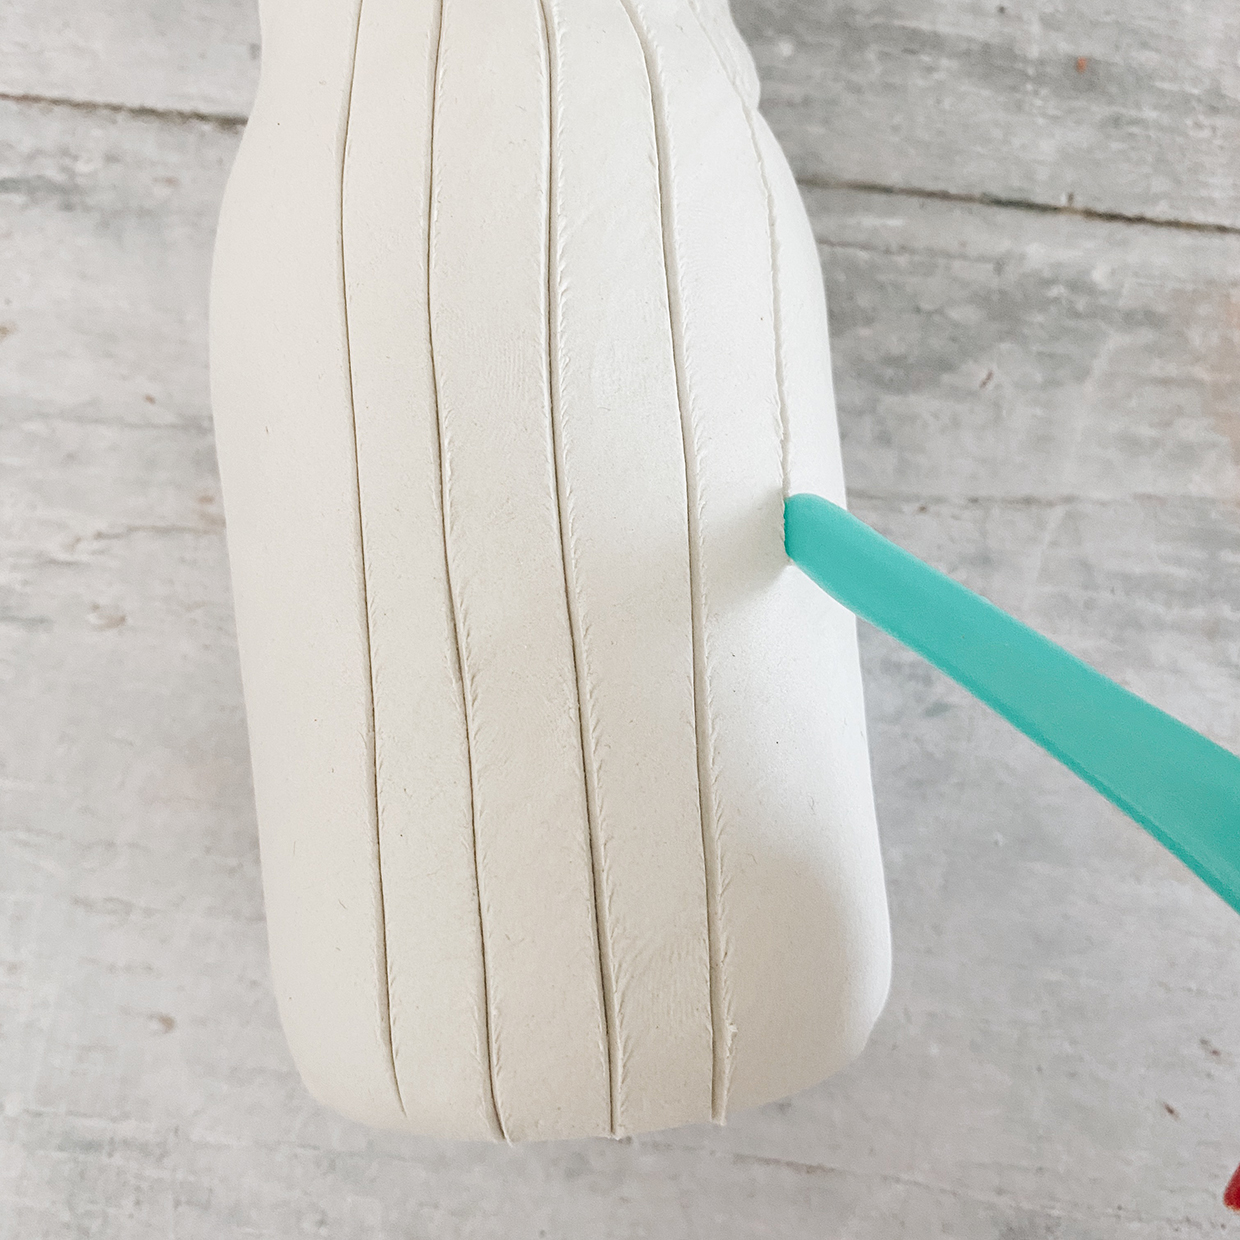 How to make an air dry clay vase step 9